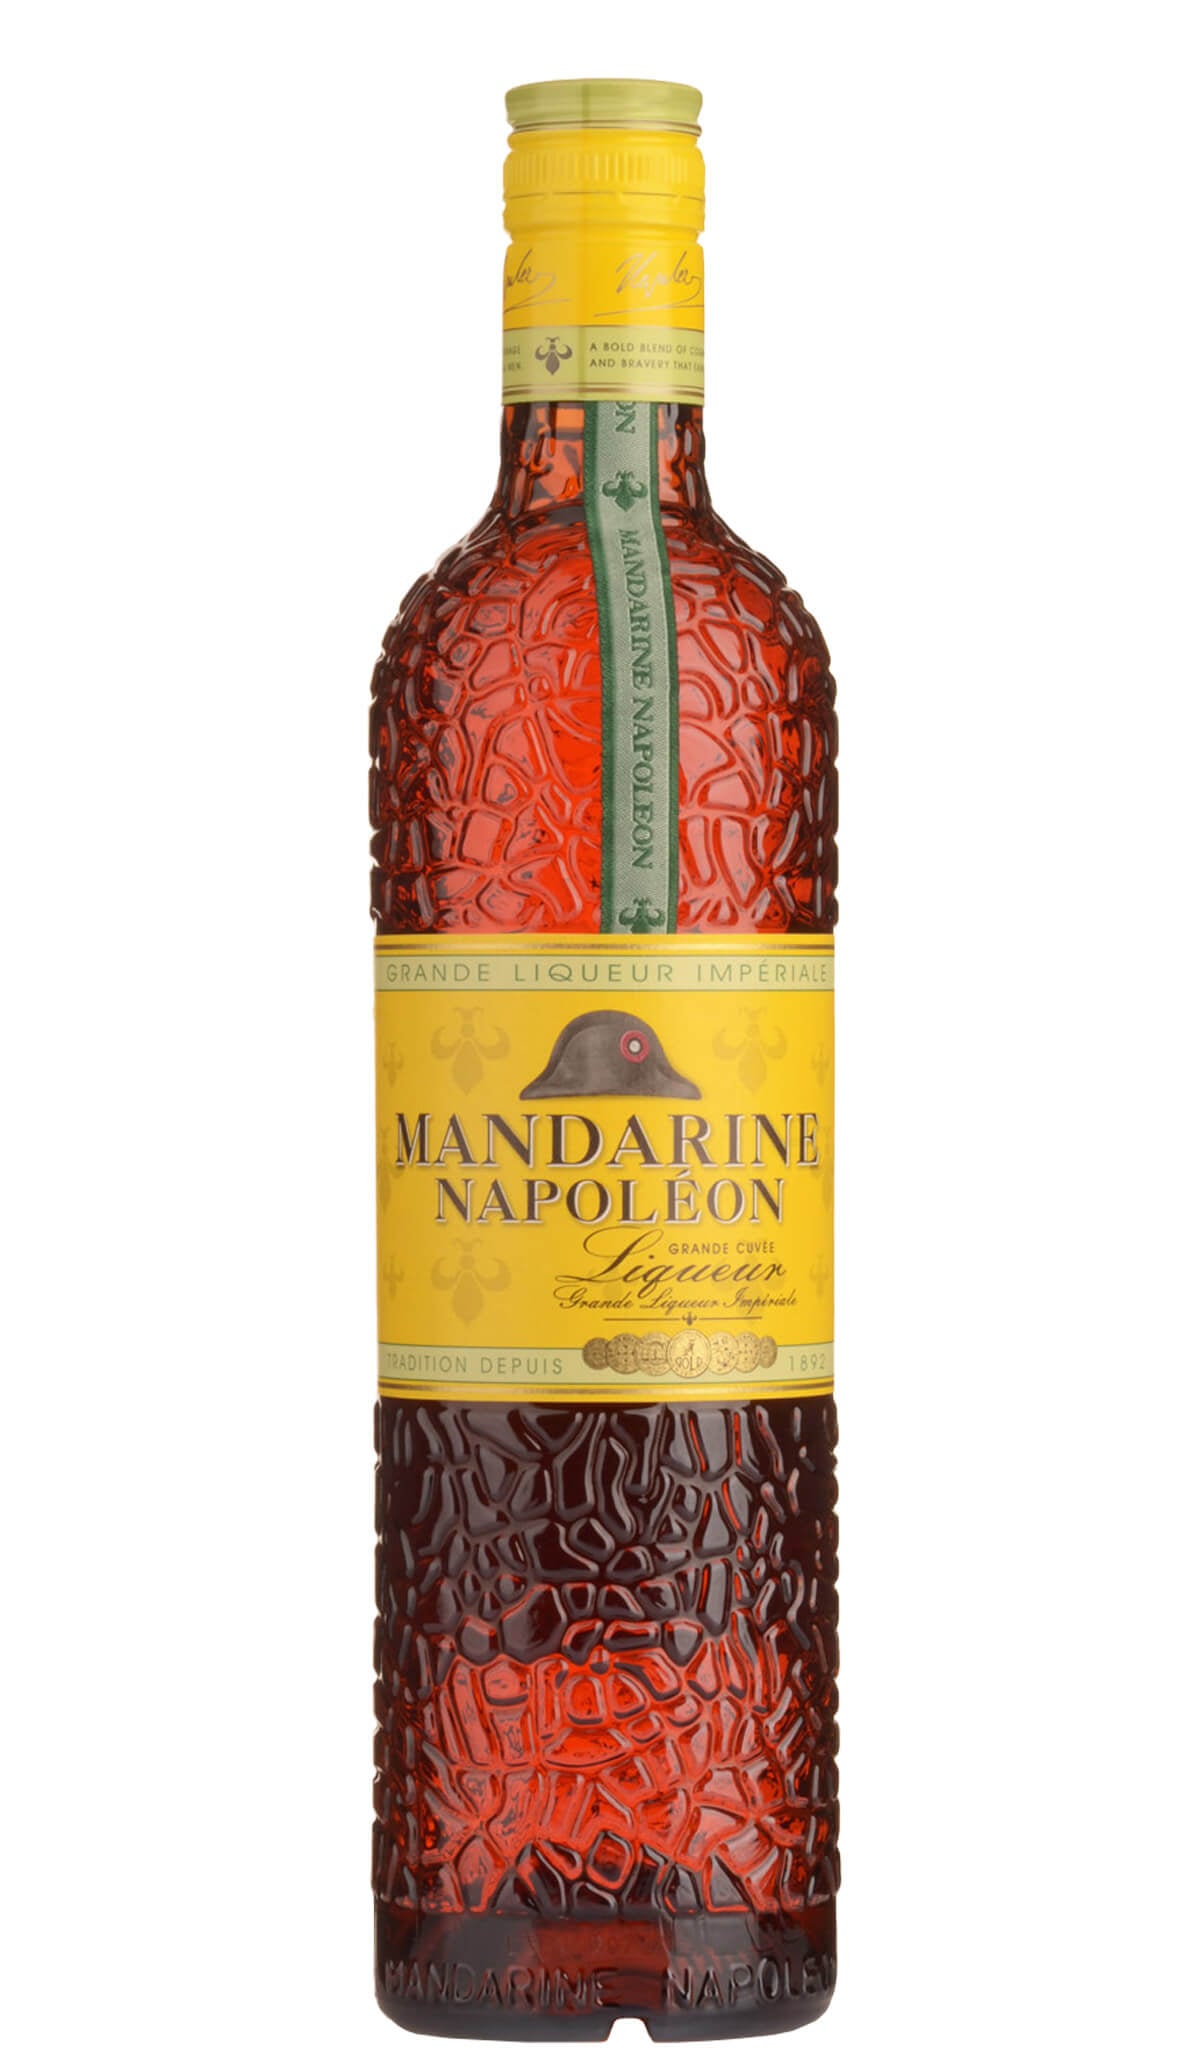 Find out more, explore the range and buy Mandarine Napoleon Liqueur 500ml (France) available online at Wine Sellers Direct - Australia's independent liquor specialists.